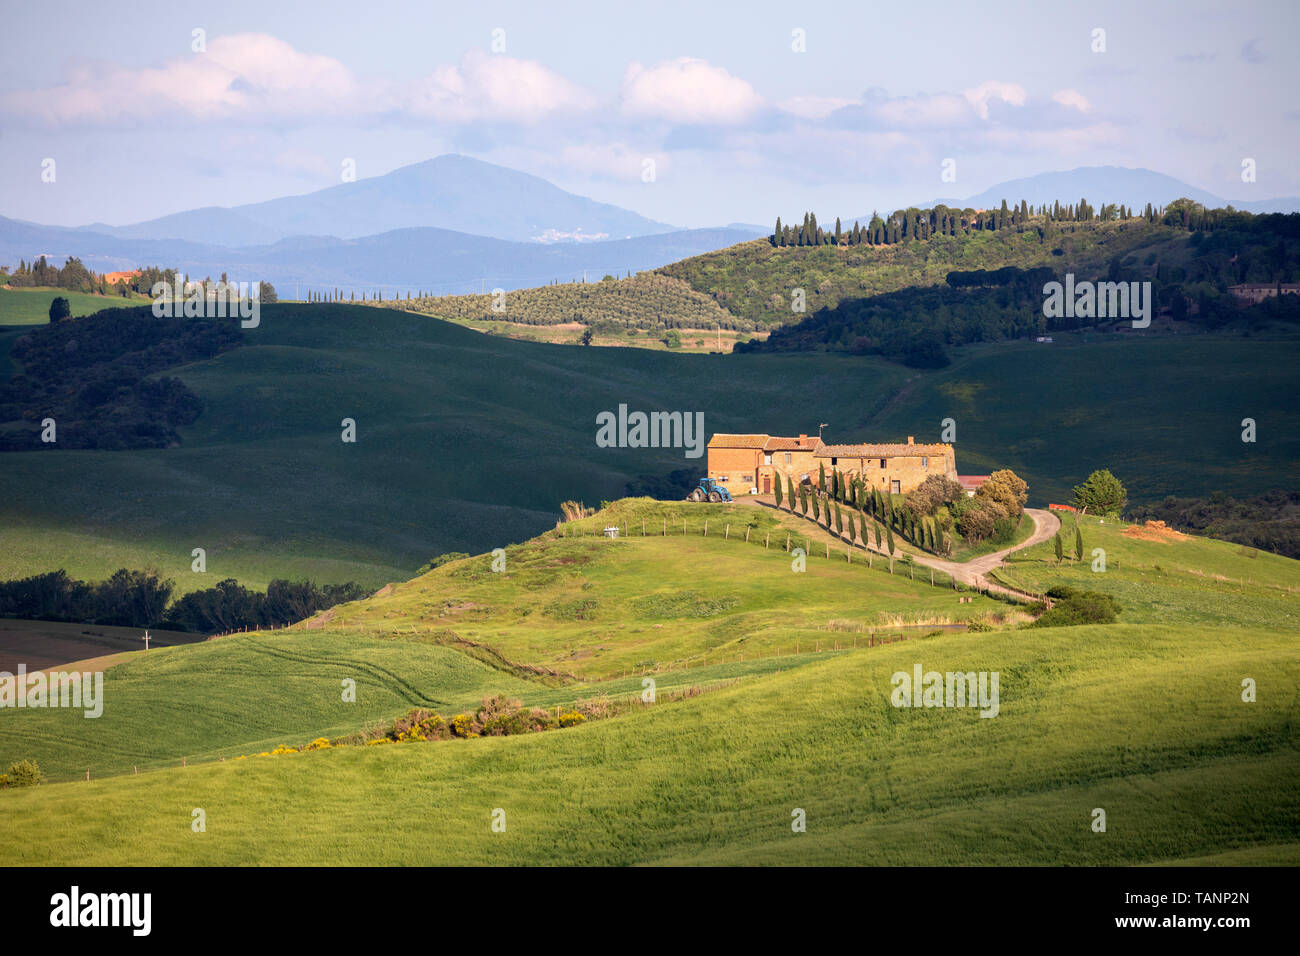 Isolated Tuscan farmhouse set in rolling Tuscan landscape, San Quirico d'Orcia, Siena Province, Tuscany, Italy, Europe Stock Photo